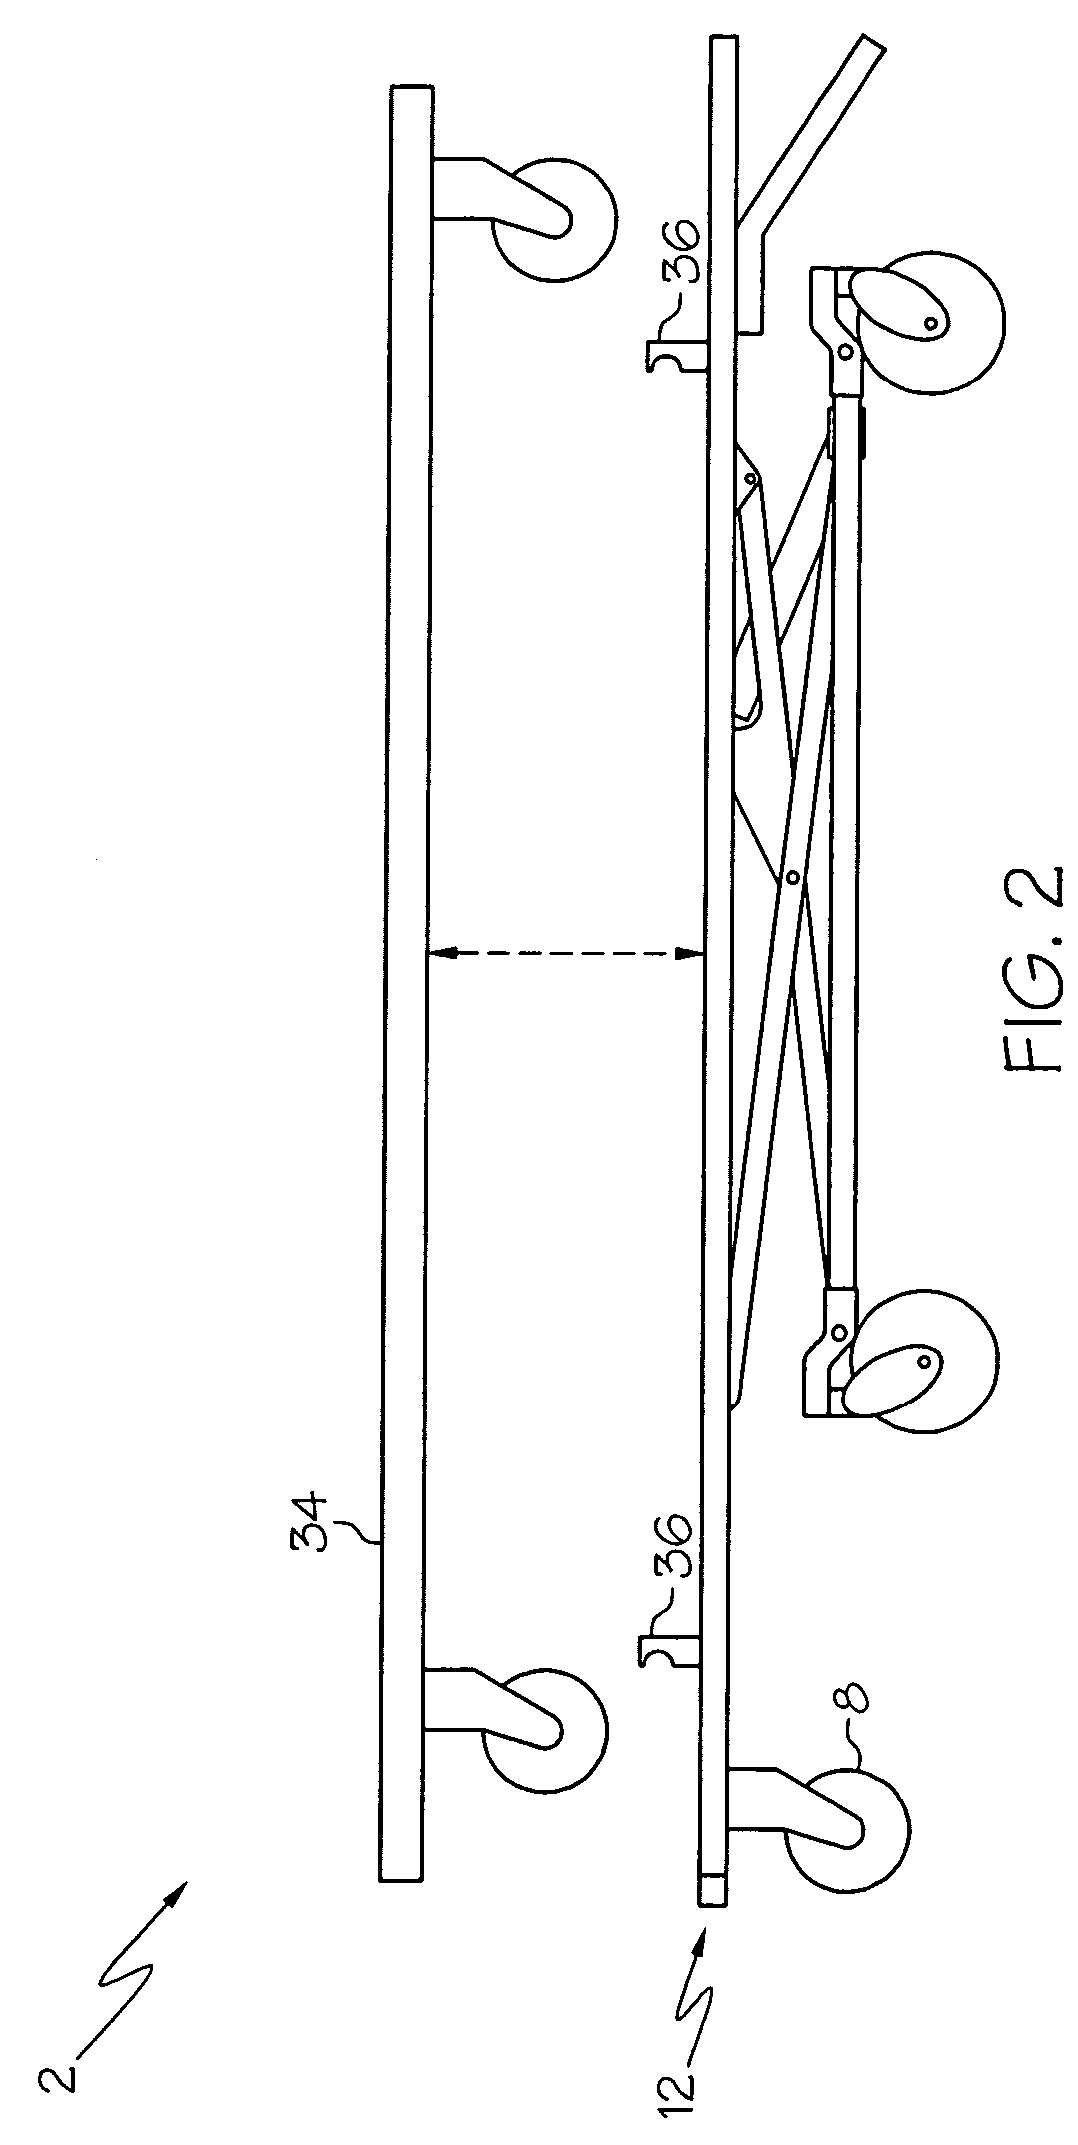 Charging system for recharging a battery of powered lift ambulance cot with an electrical system of an emergency vehicle